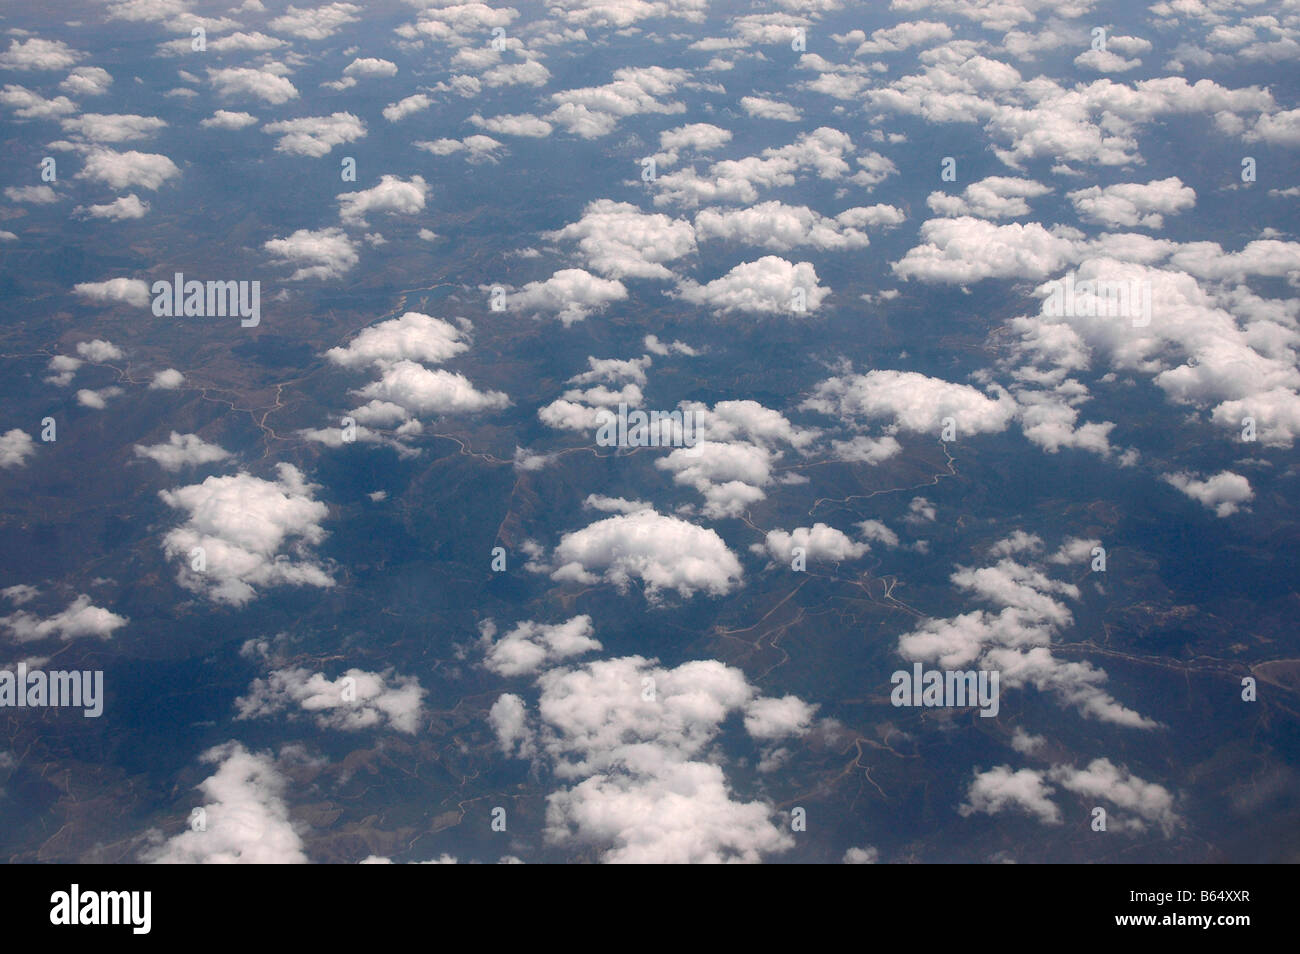 Clouds and land as seen from an airplane. Stock Photo